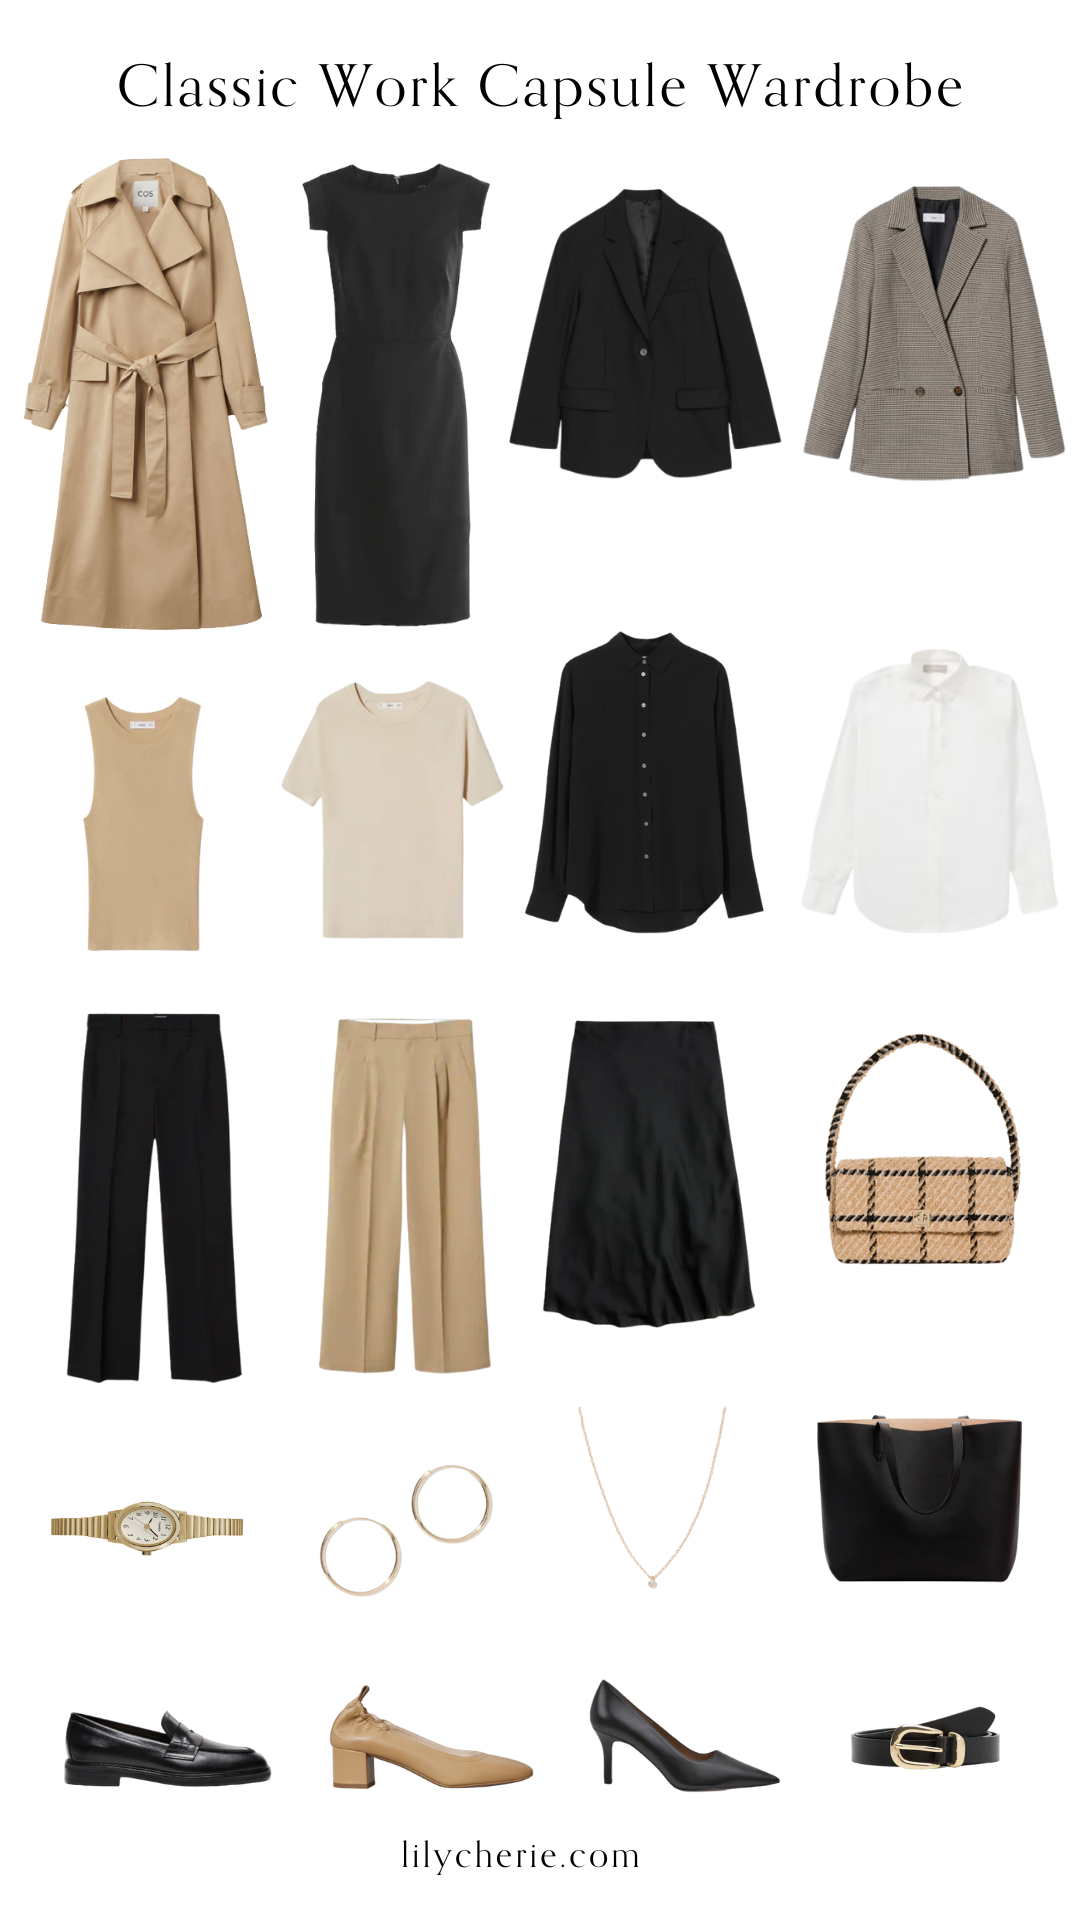 Wardrobe Essentials for Professional Women: Quality over Quantity